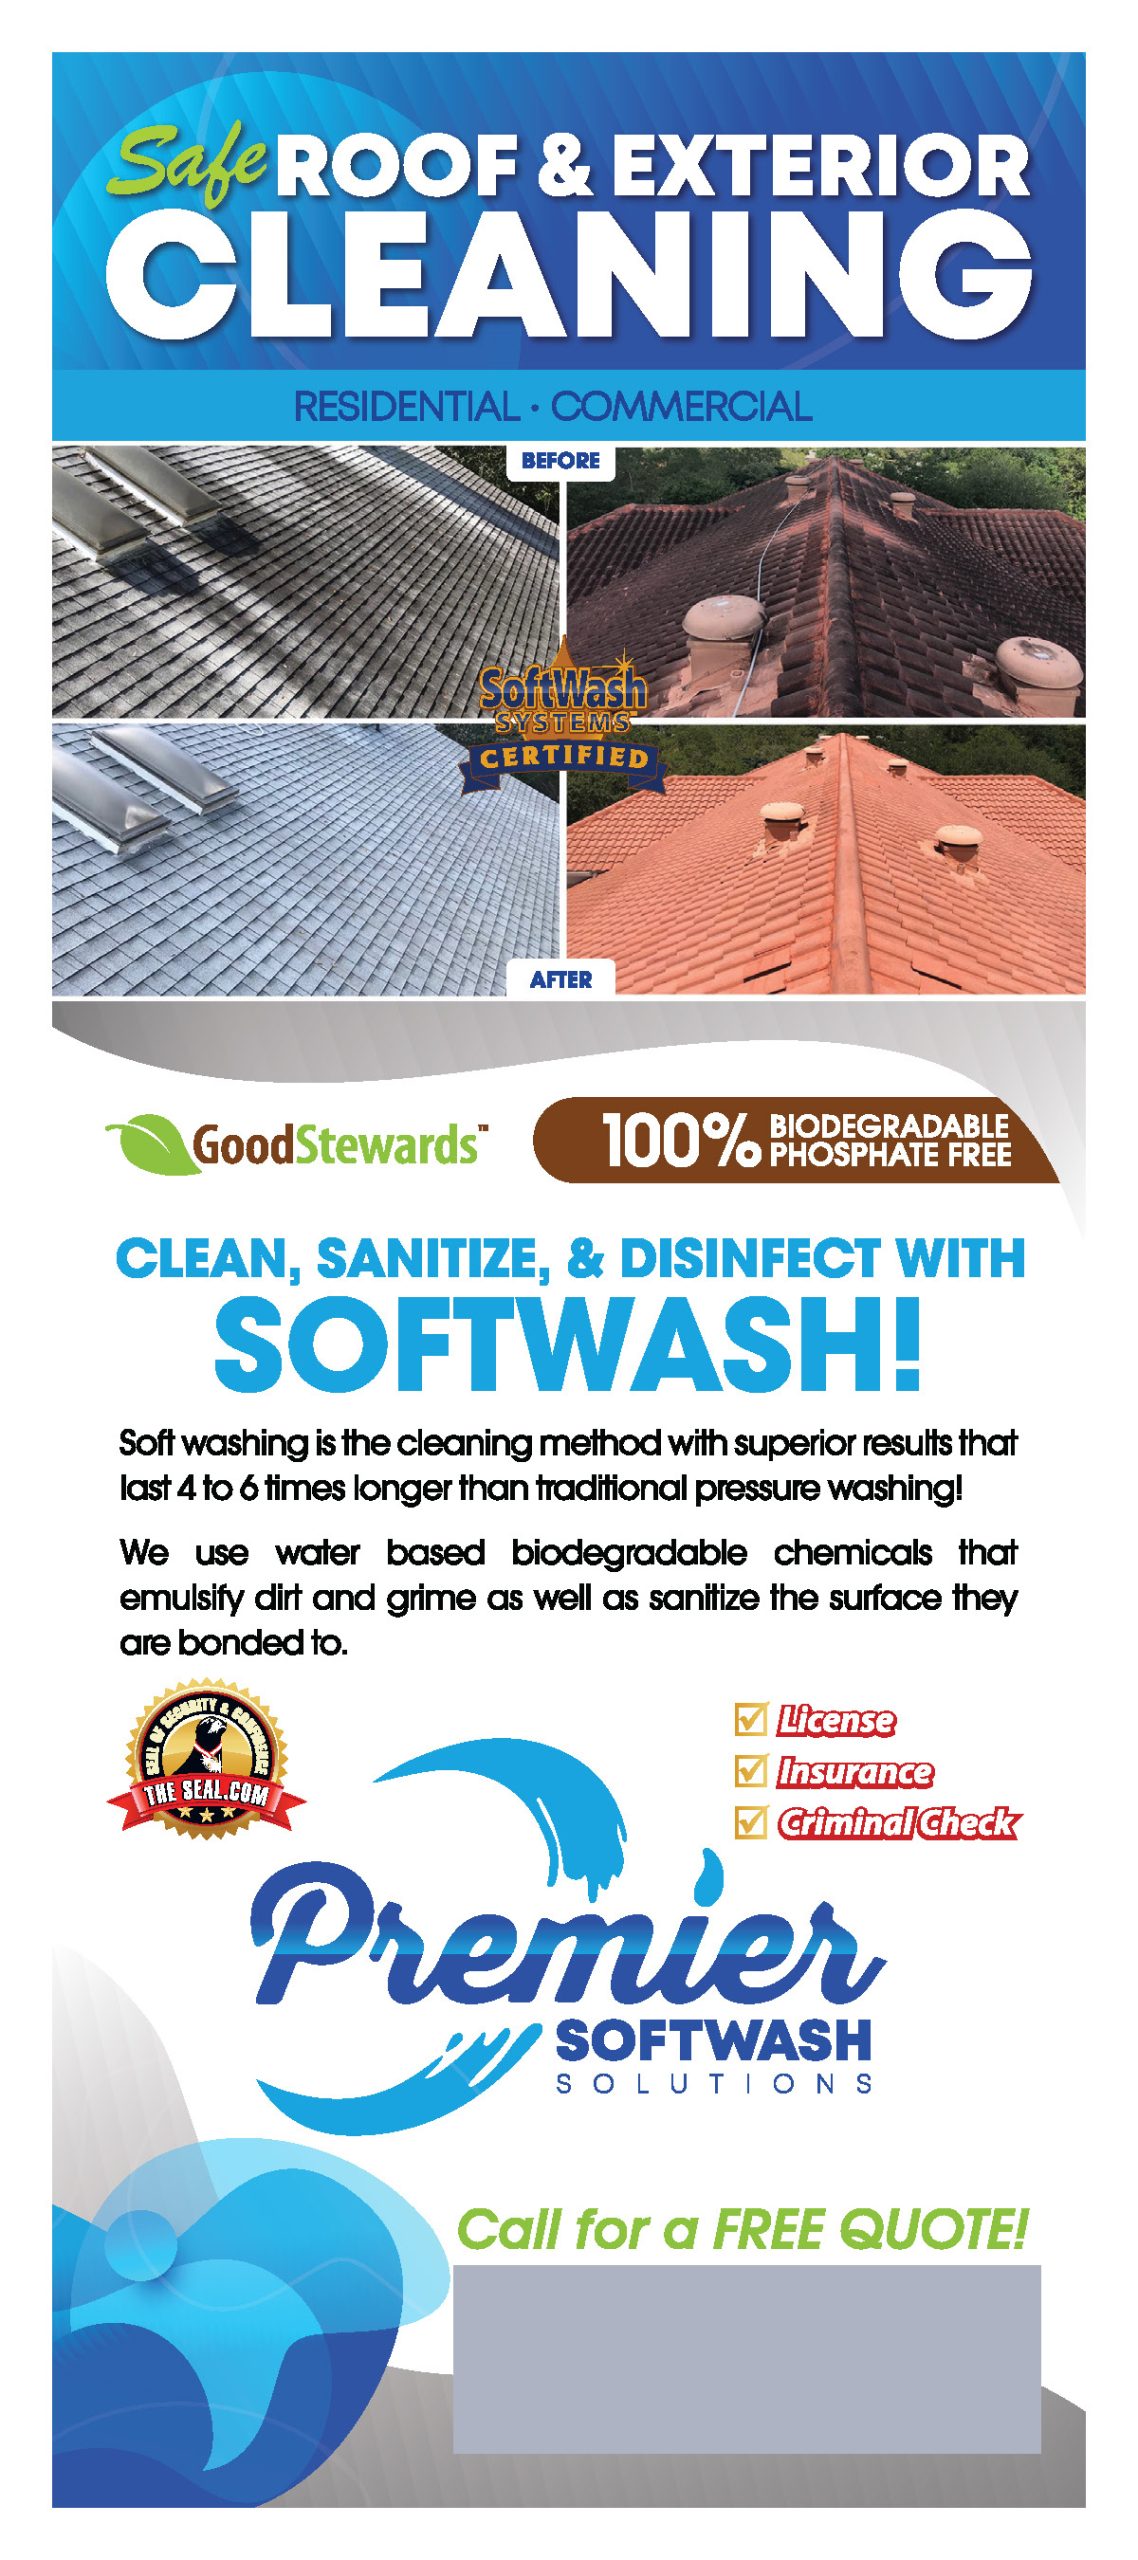 Successful Cleaning Services Postcard Campaign